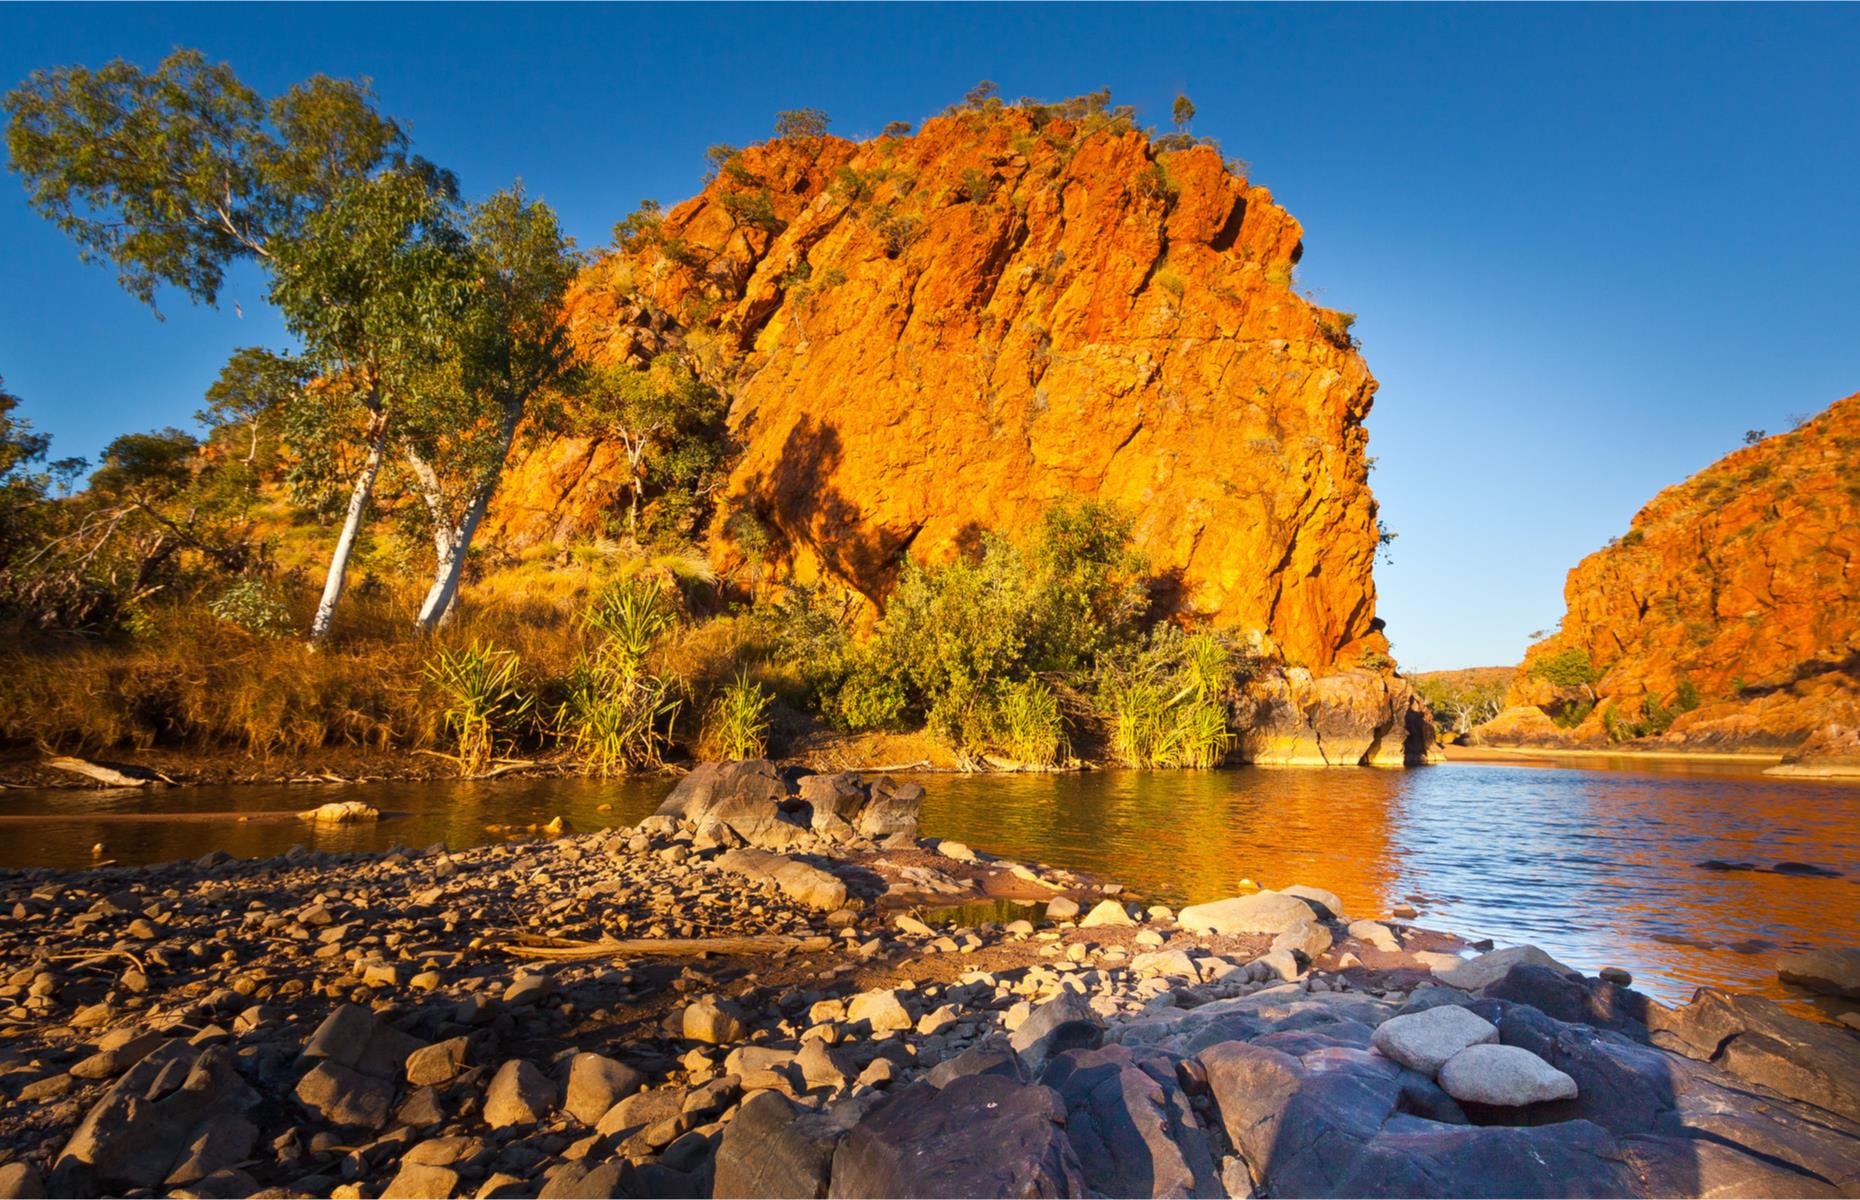 An oasis-like town on the banks of the Ord River, Kununurra is at the eastern end of the legendary Gibb River Road, an unsealed track which traverses 410 miles through the beautiful wilderness of the Kimberley region. It's a beaut of a base to explore East Kimberly. Water is the main attraction here with the town’s name derived from Aboriginal language meaning big water. Days here are all about exploring the area's striking waterways.